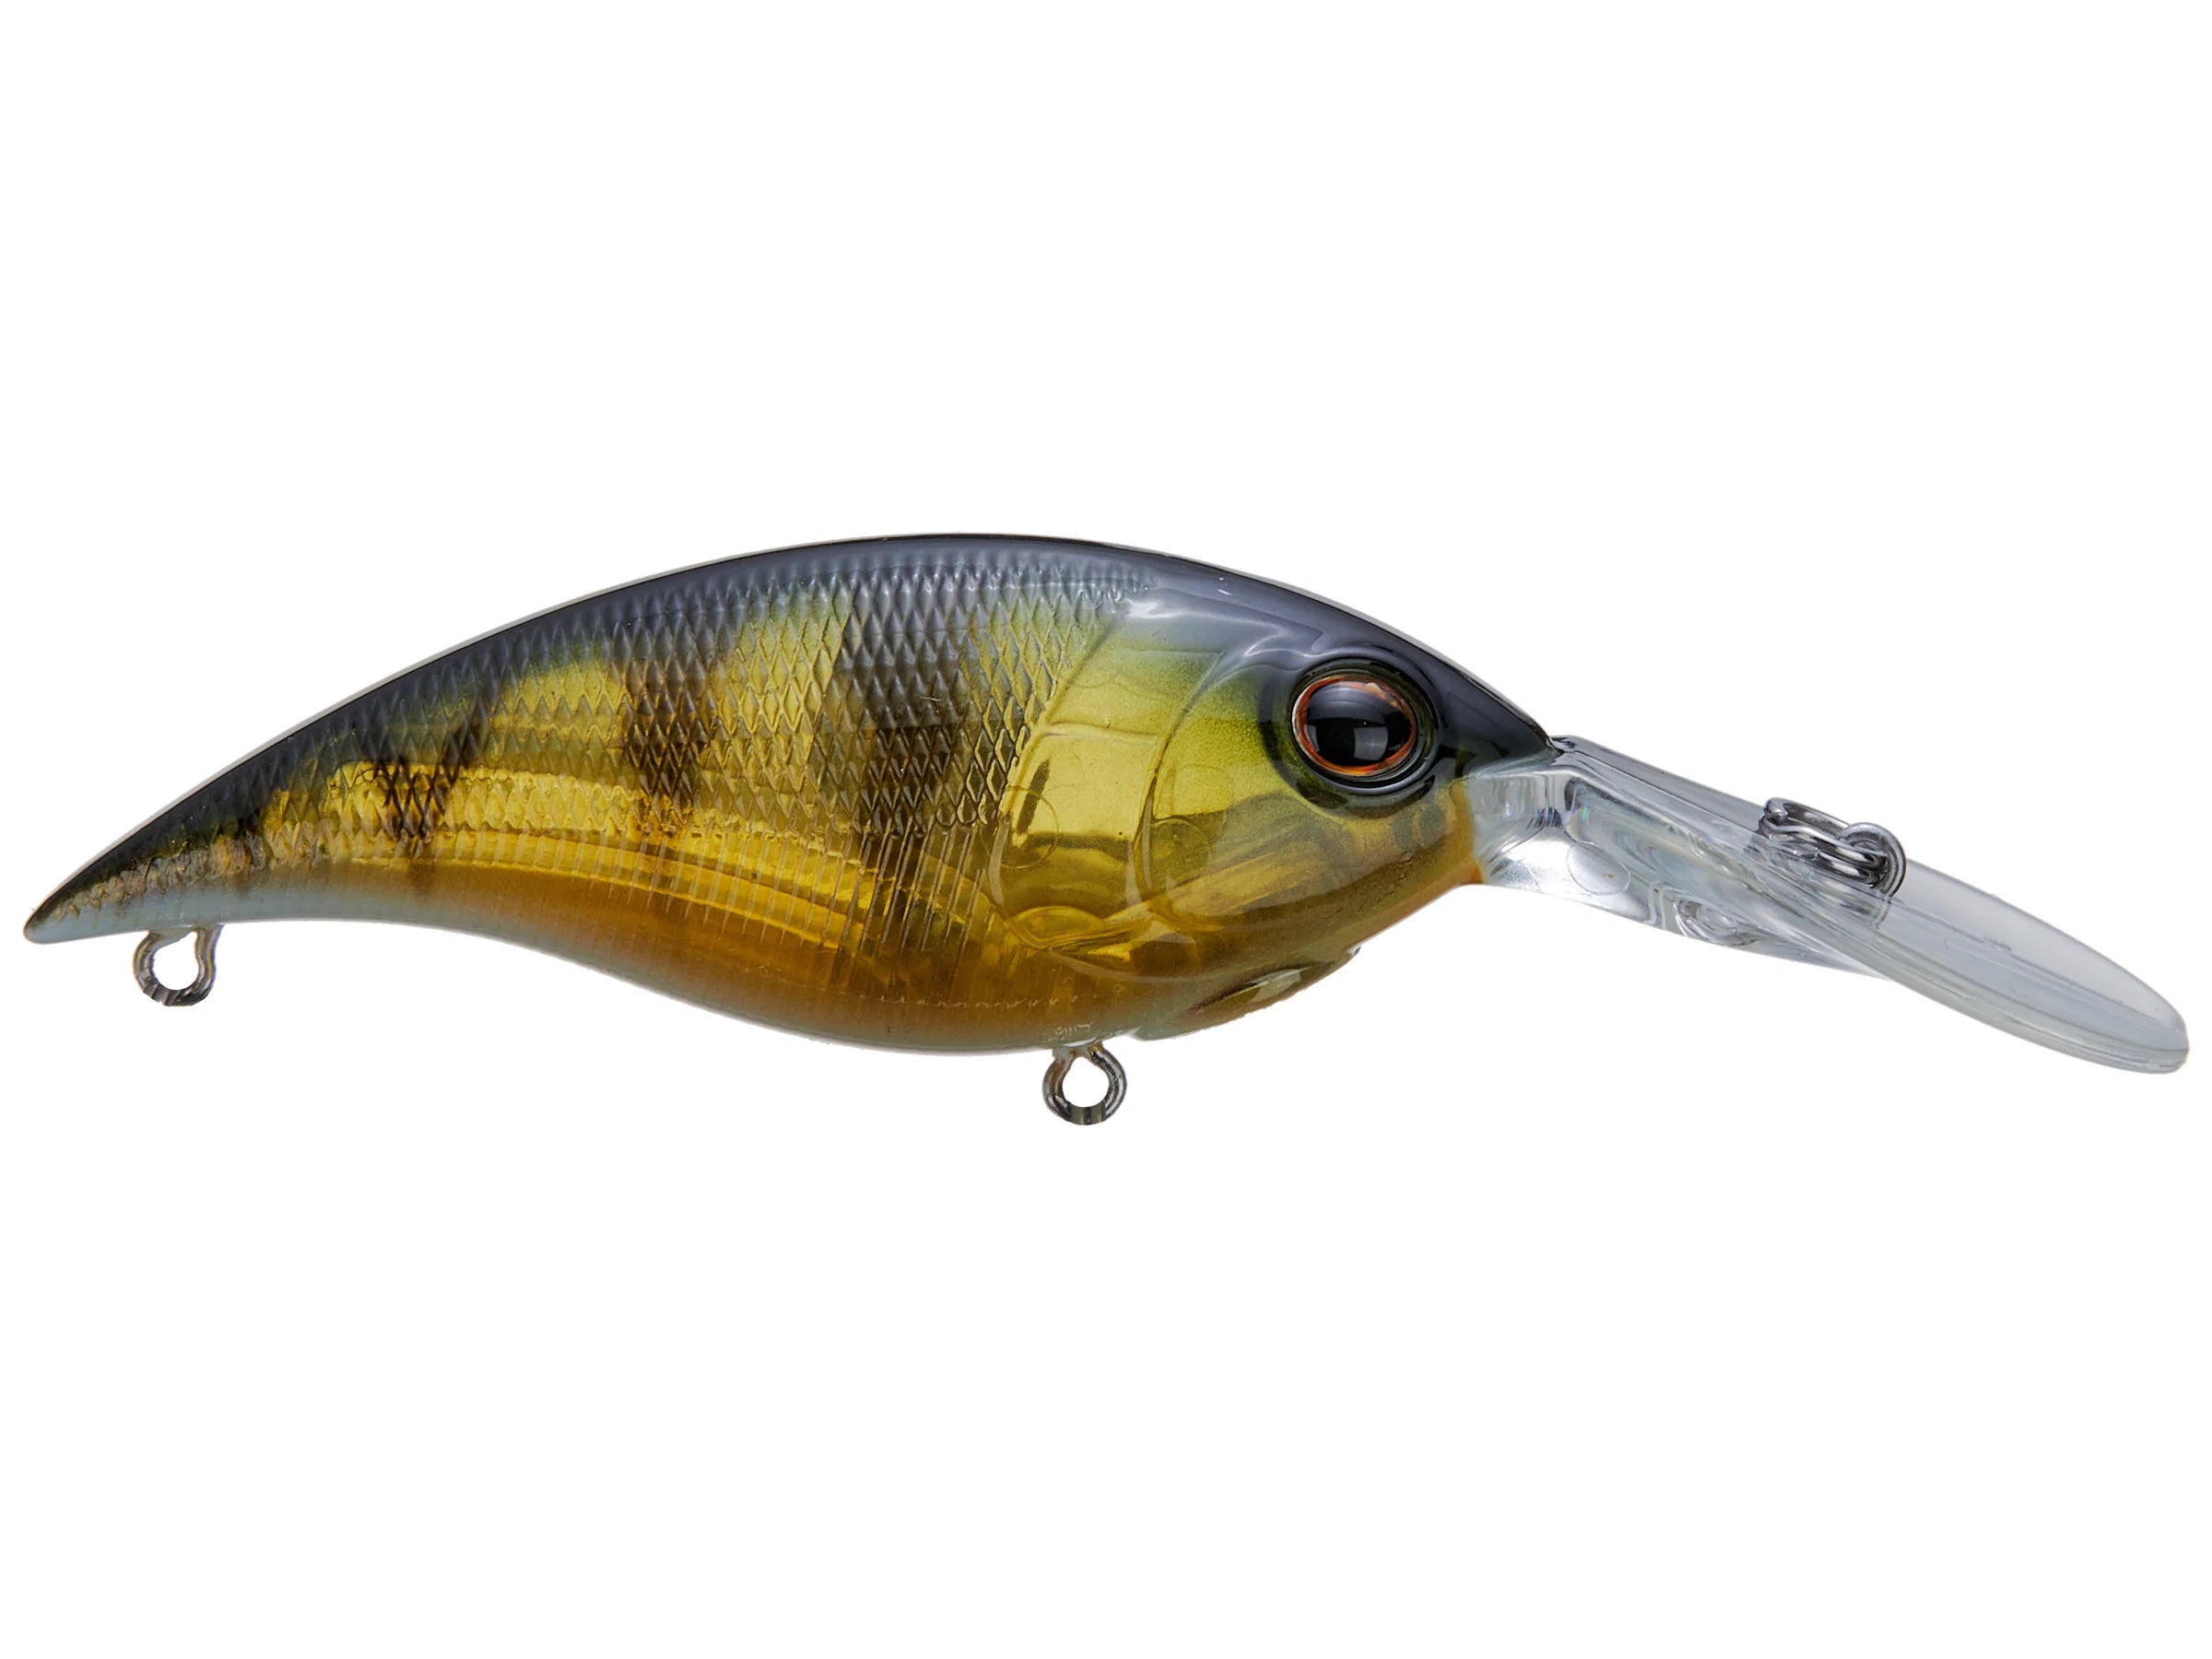 50 Unpainted Square Bill Fishing Lure Blanks 9cm/10g, Medium Diving  Crankbaits With Rattles And Plastic Body From Tgrff, $52.11